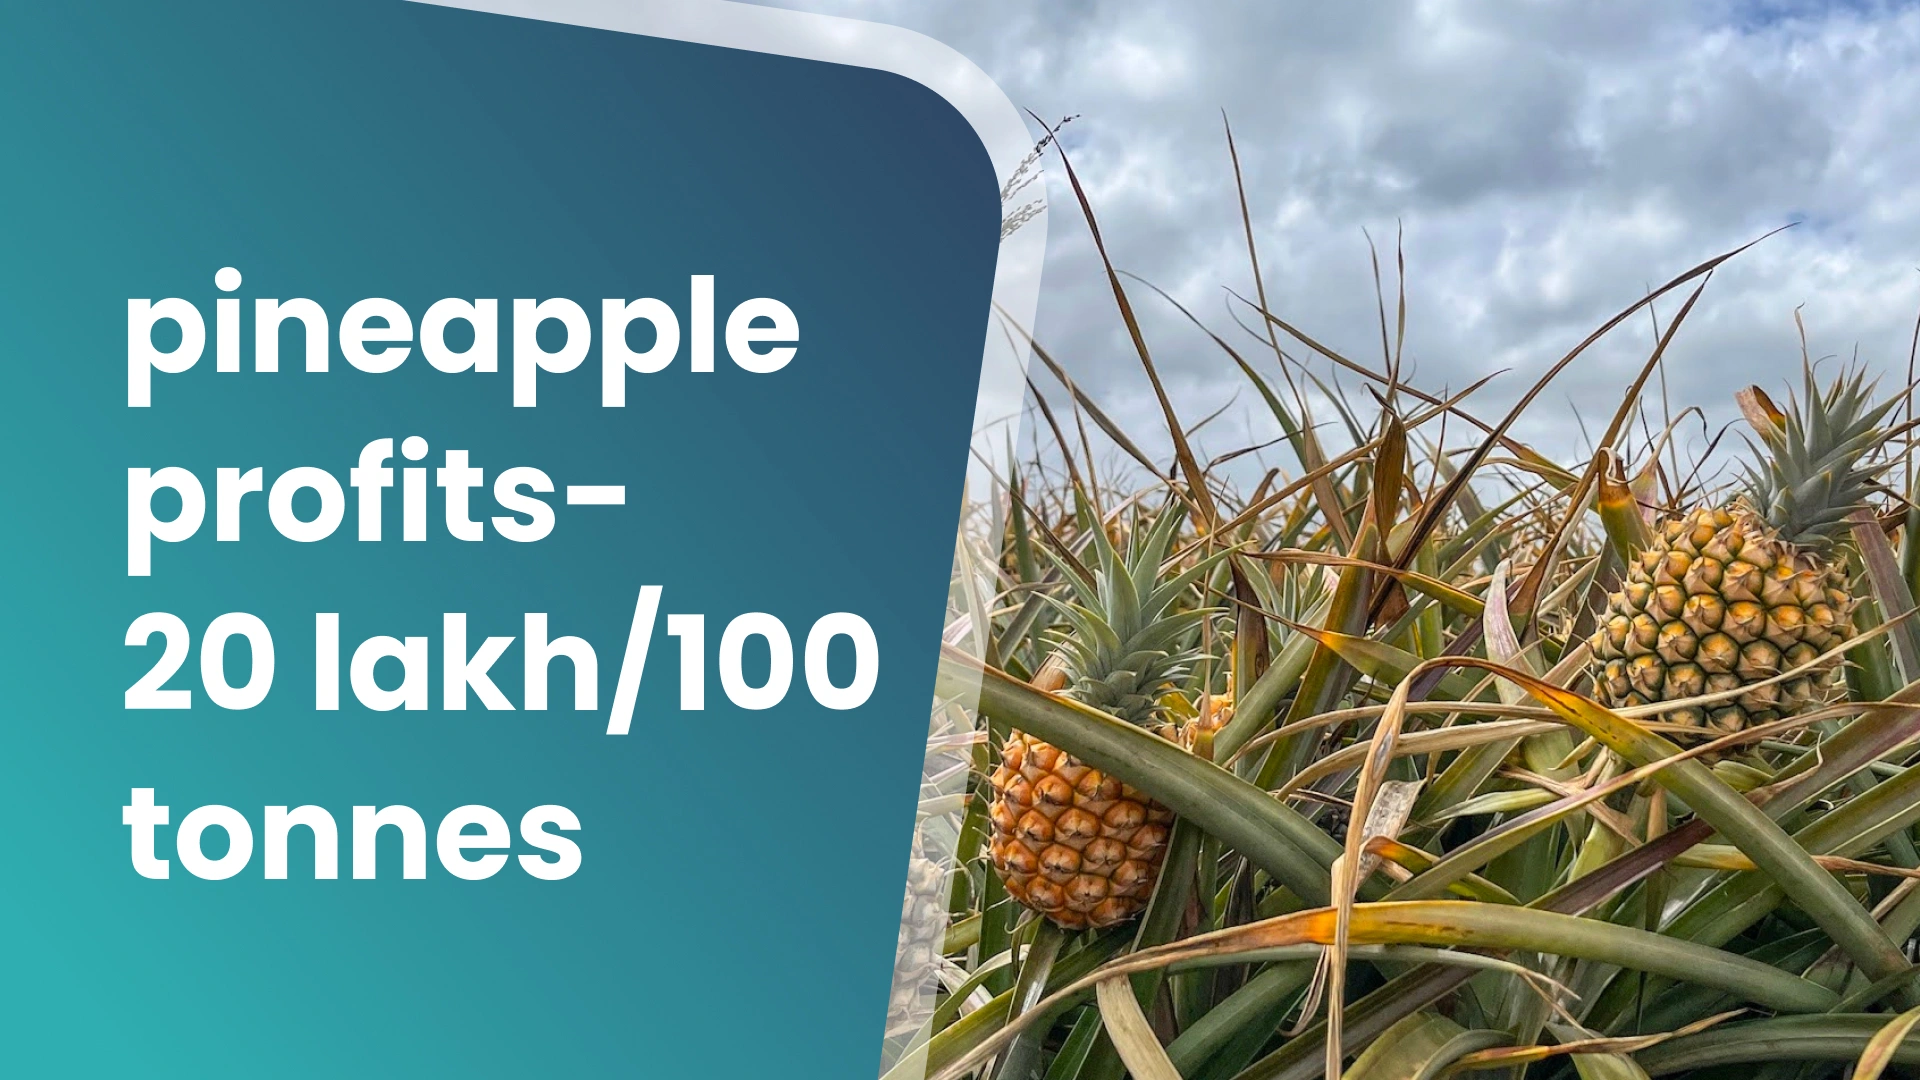 Course Trailer: Pineapple Farming Course - Earn 20 lakh/100 tonnes. Watch to know more.